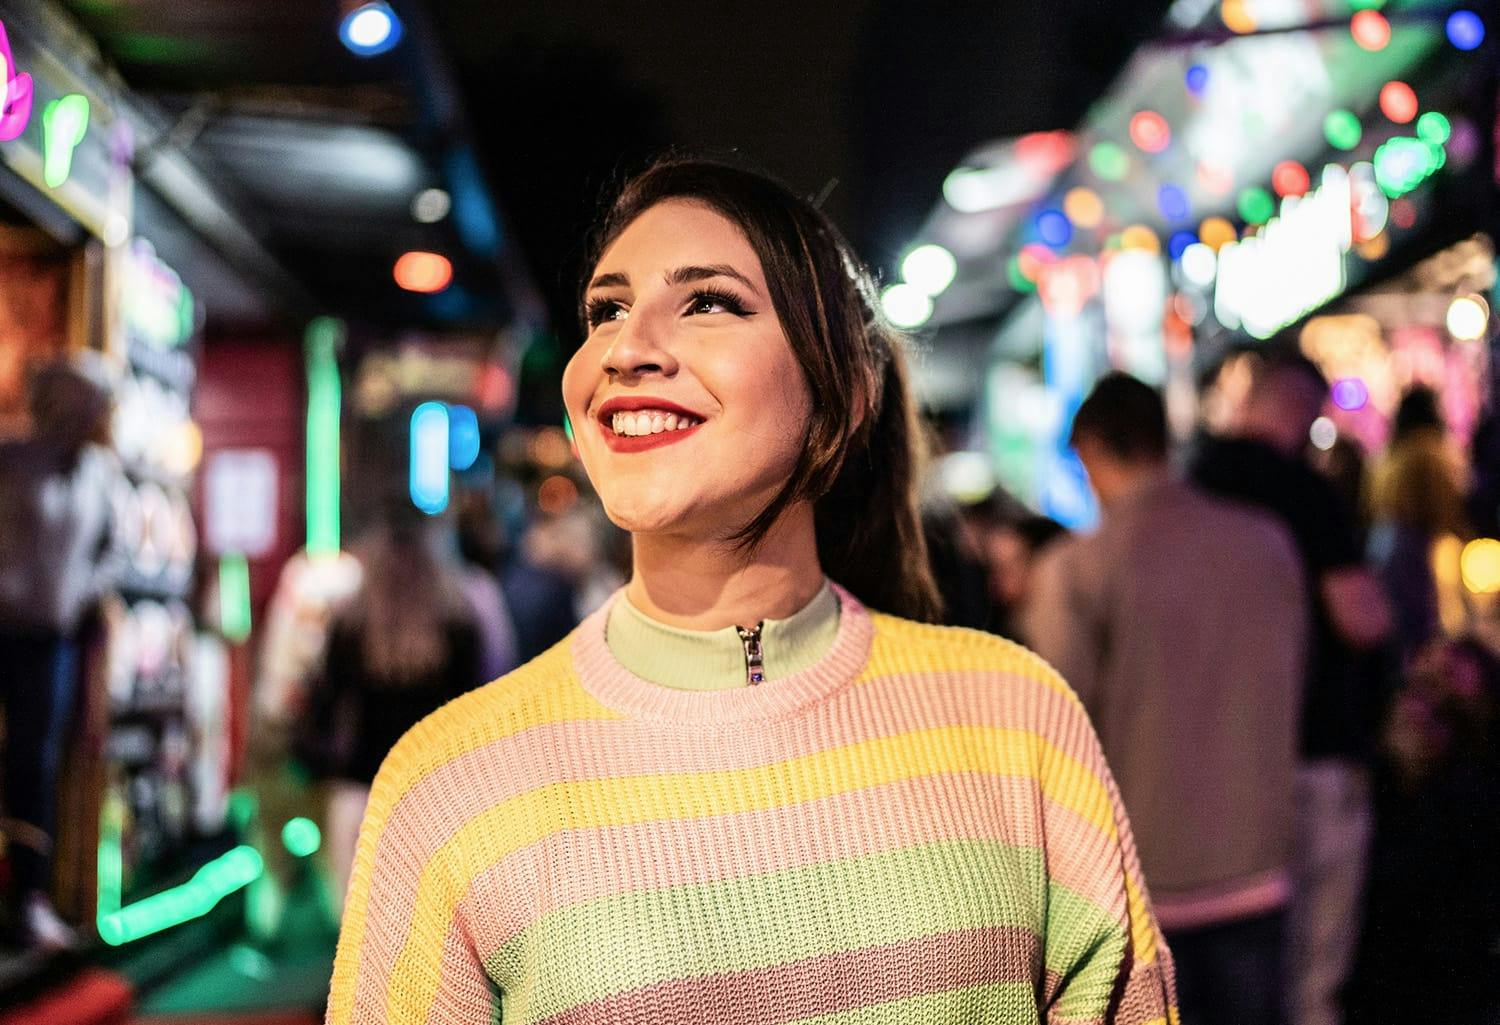 Woman in striped sweater, smiling